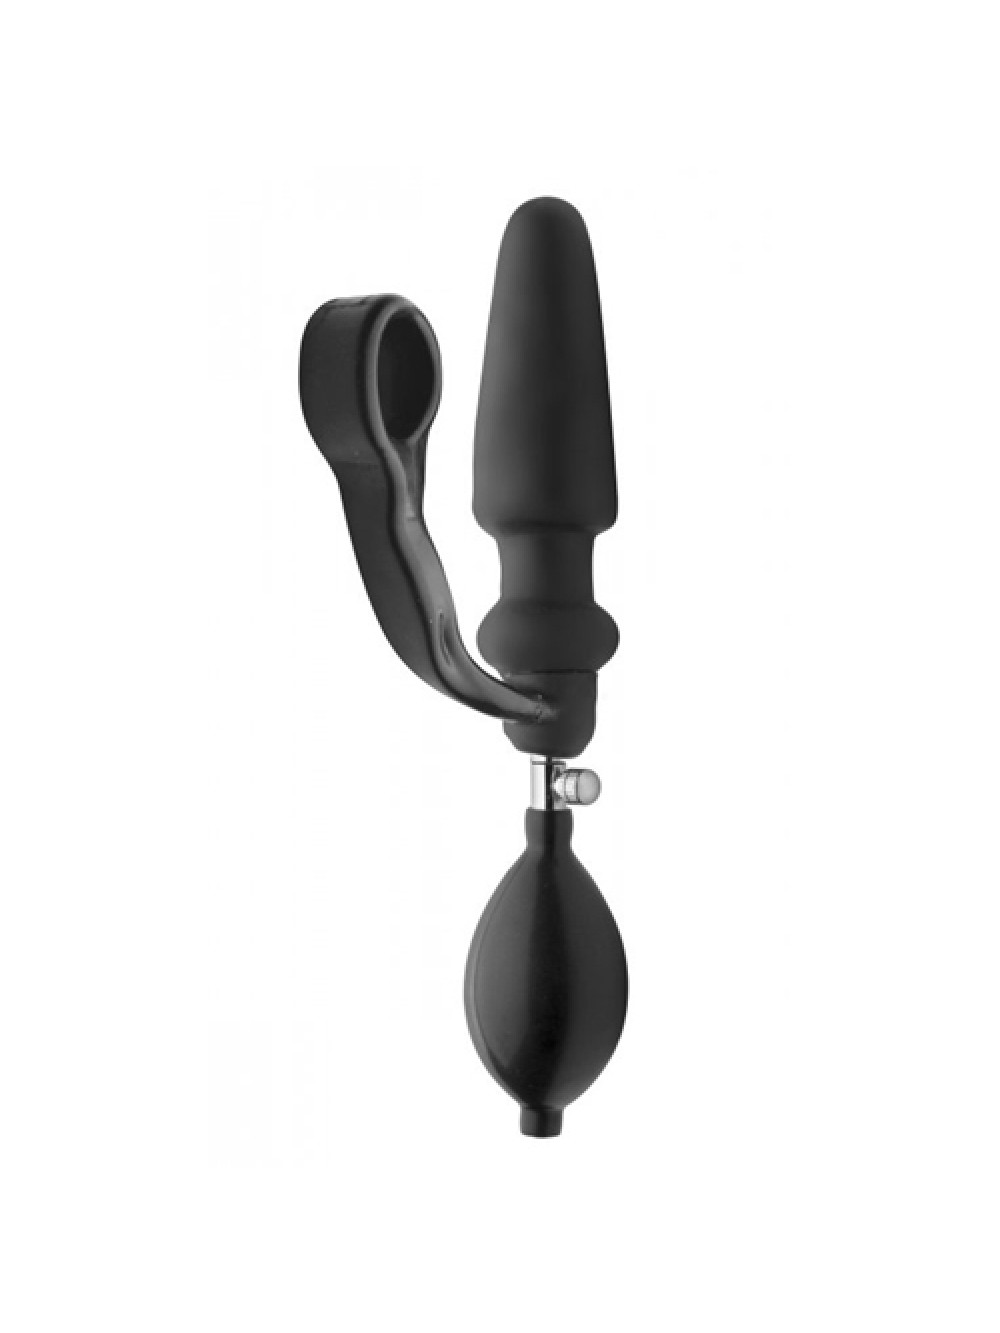 Exxpander Inflatable Plug with Cock Ring and Removable Pump